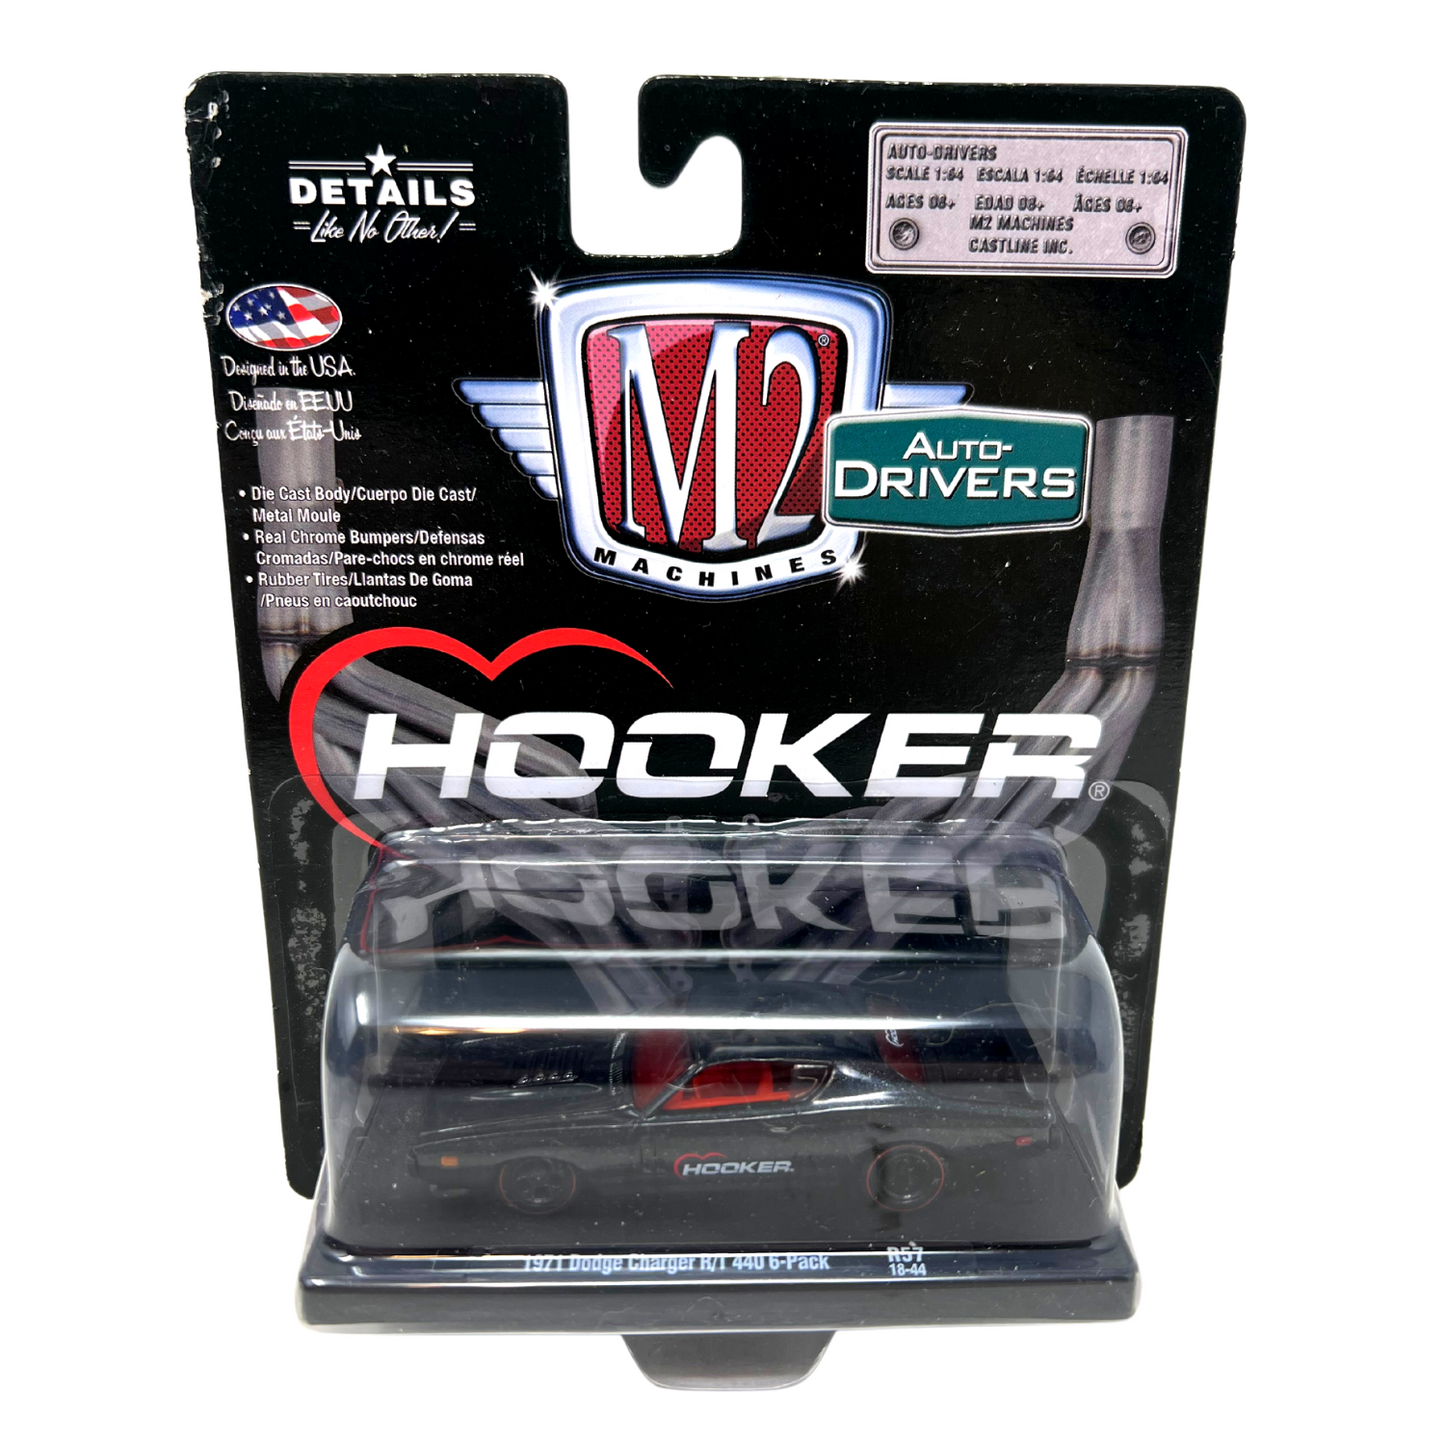 M2 Machines Auto-Drivers 1971 Dodge Charger RT 440 6-Pack R57 1:64 Diecast